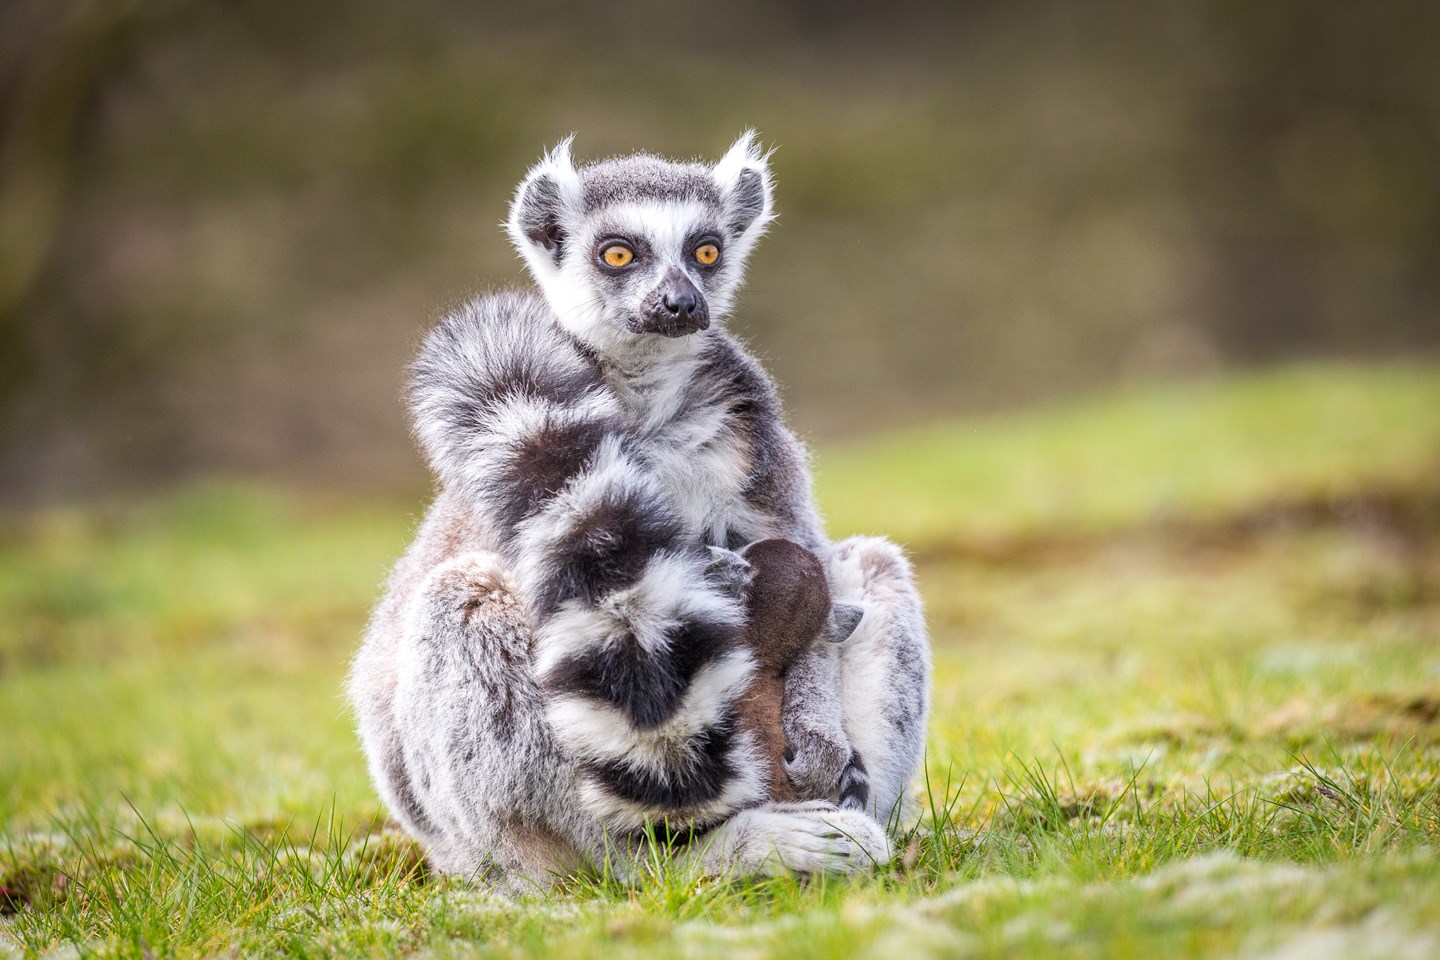 Ring-Tailed lemur sits on grass and holds own tail